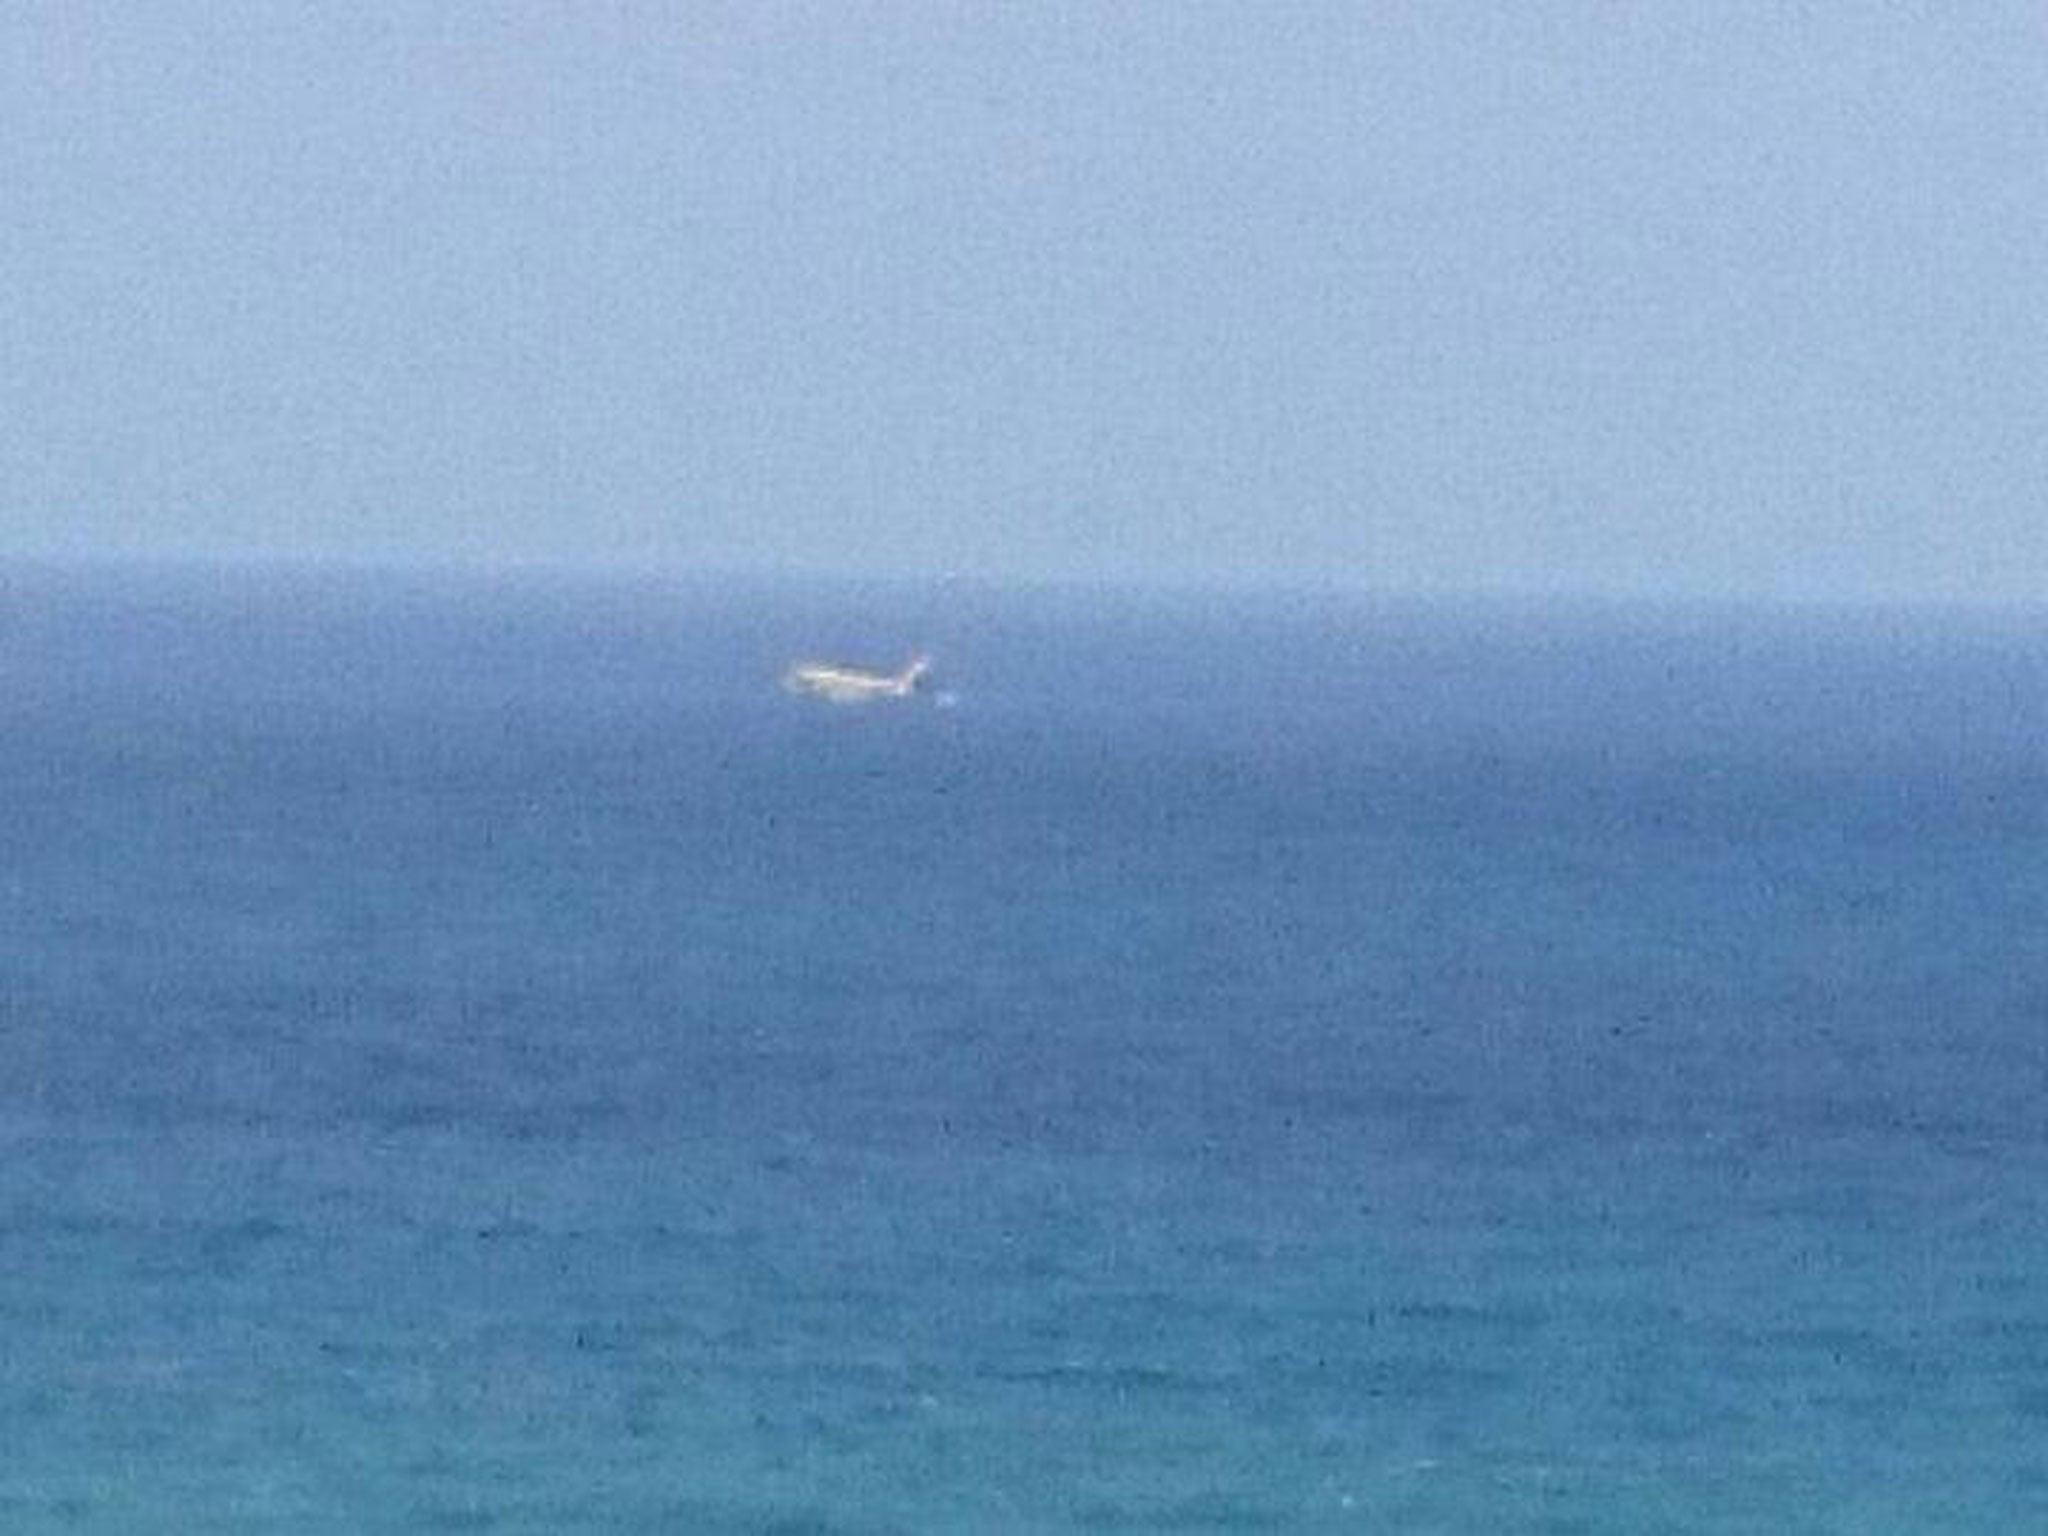 A tug boat that was mistaken for a passenger jet two miles off the coast of Gran Canaria